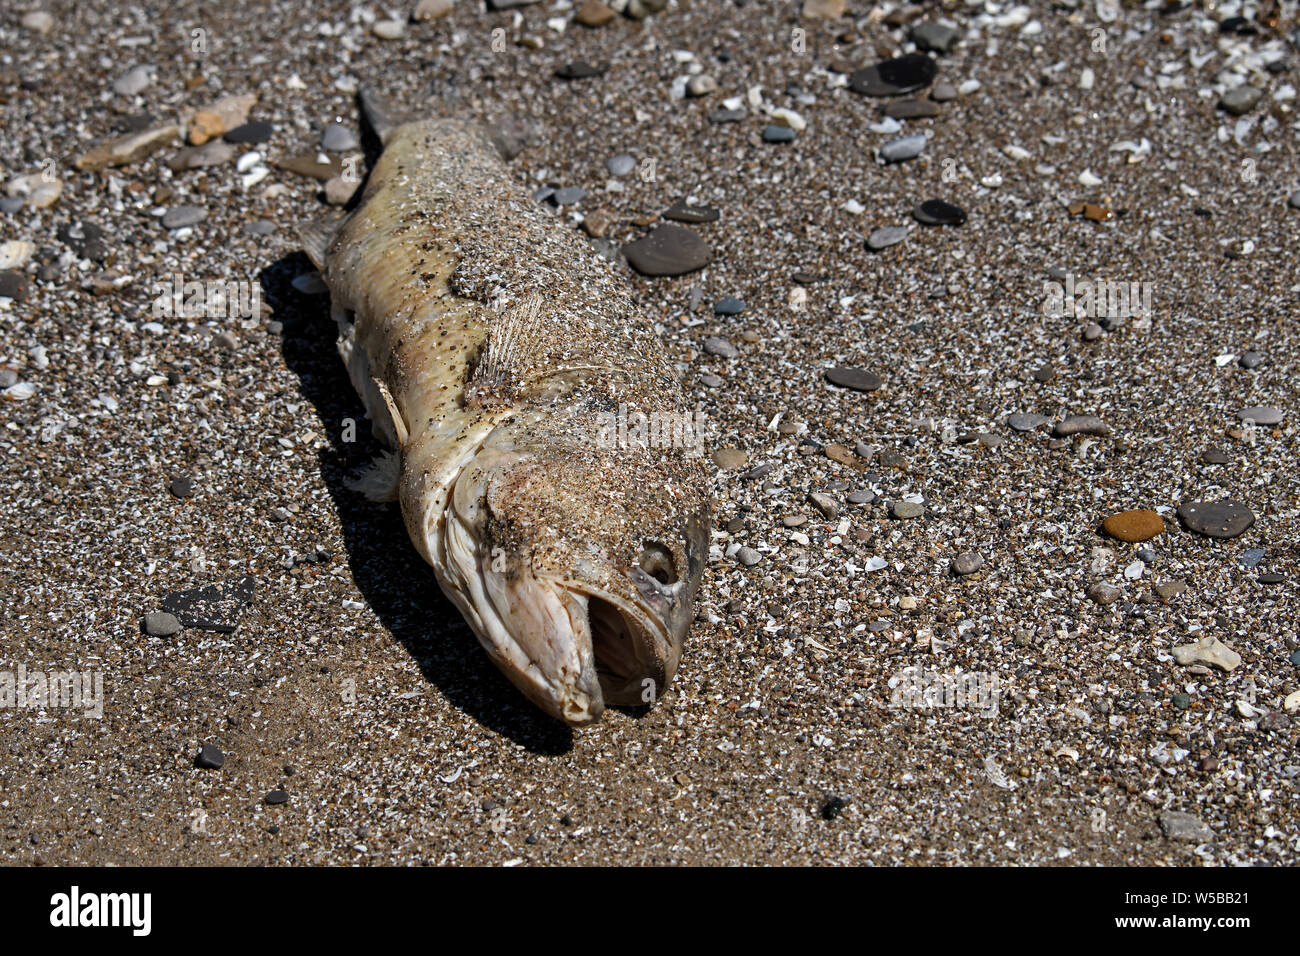 Dead fish along the shores of Lake Erie in Ohio, USA Stock Photo